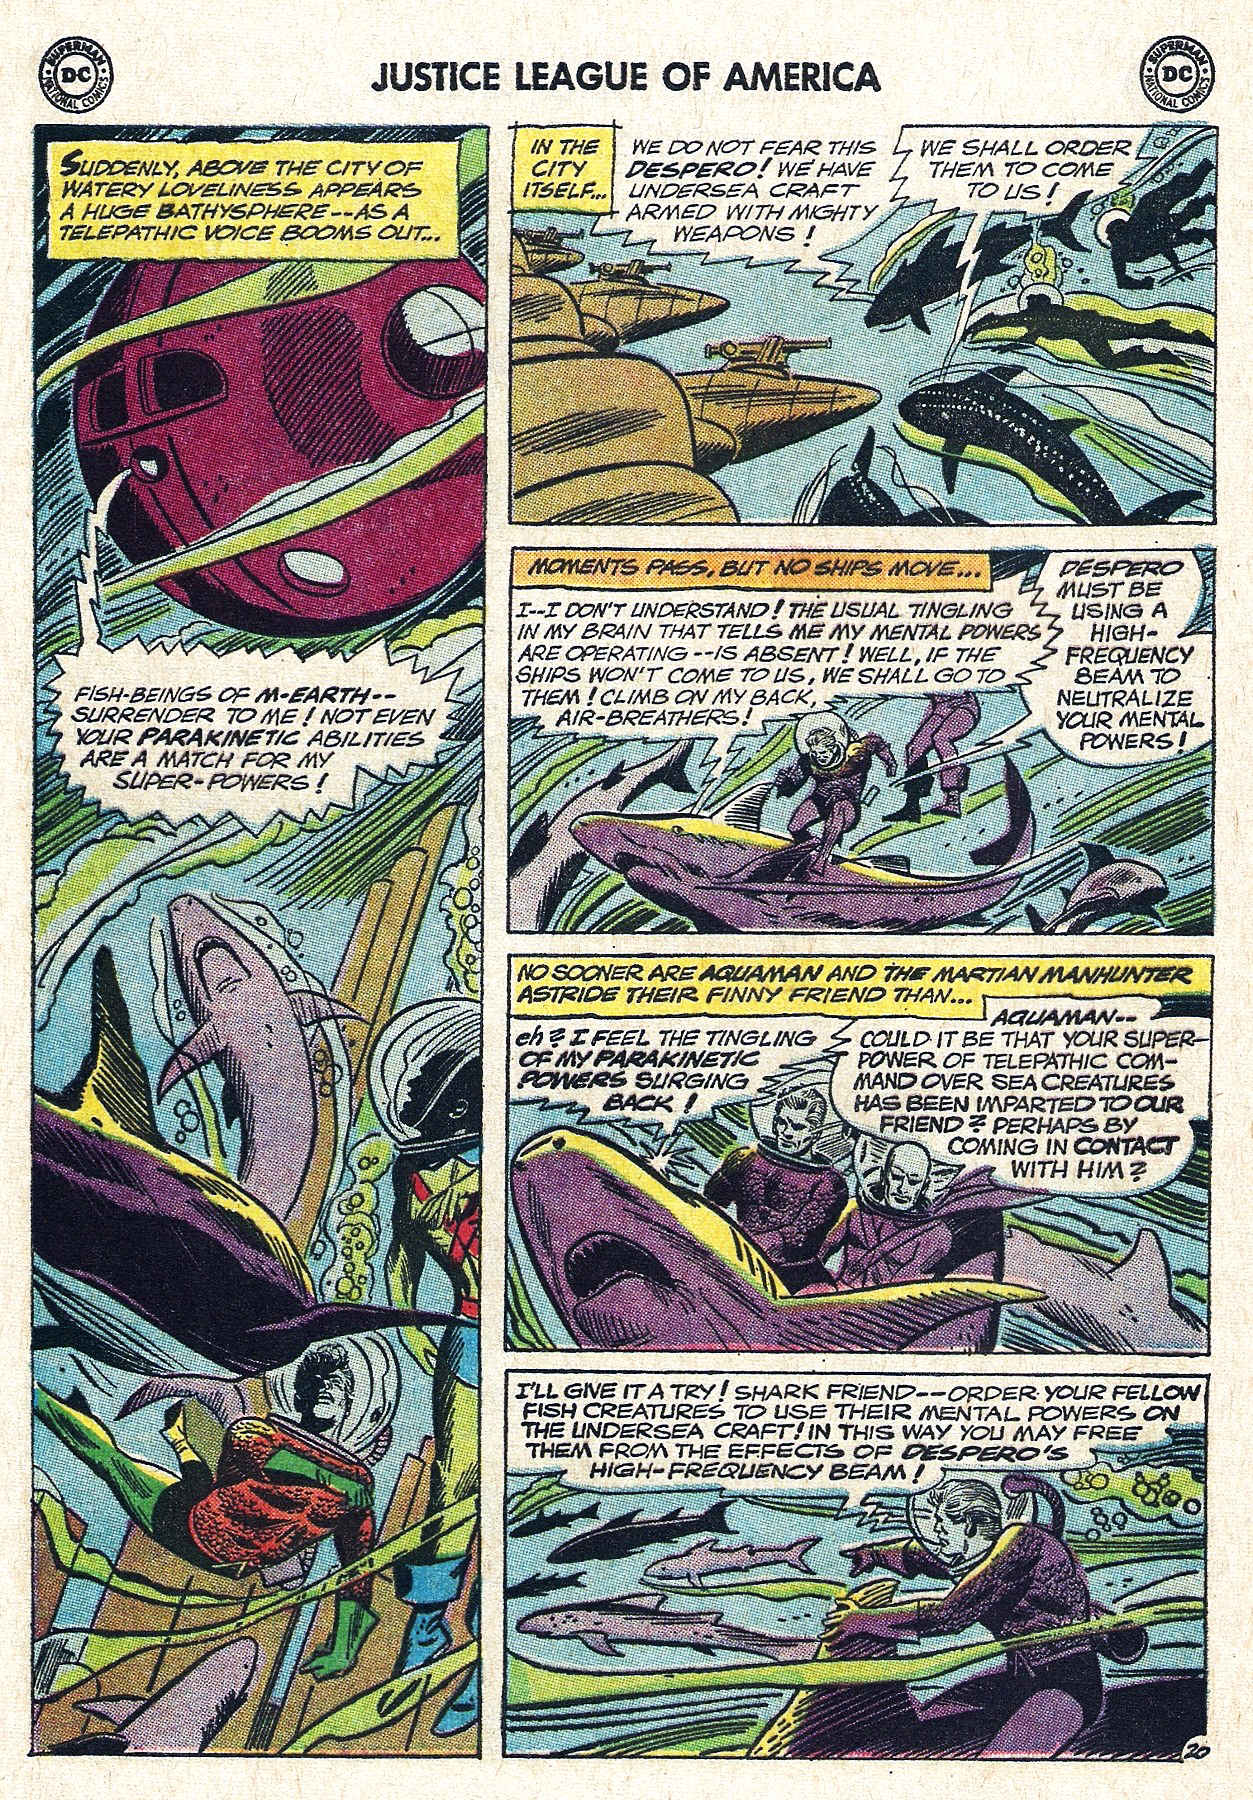 Justice League of America (1960) 26 Page 23